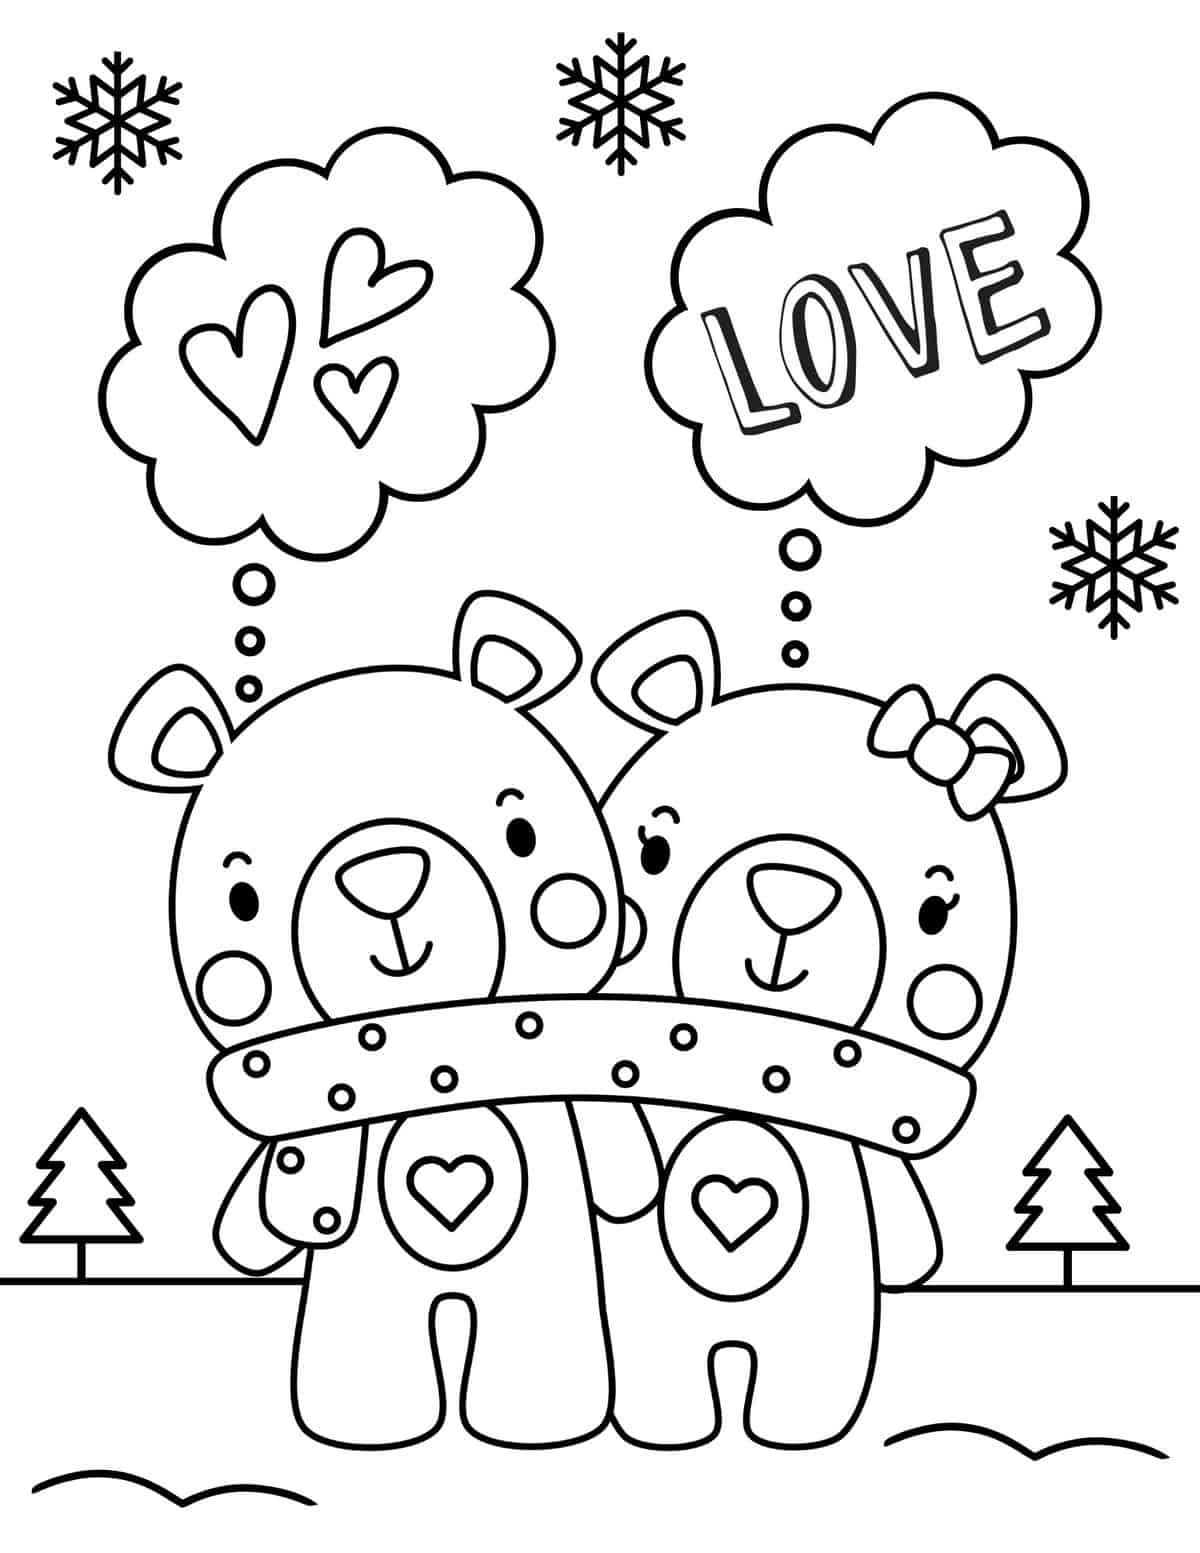 cute bears wrapped up in a scarf together in love